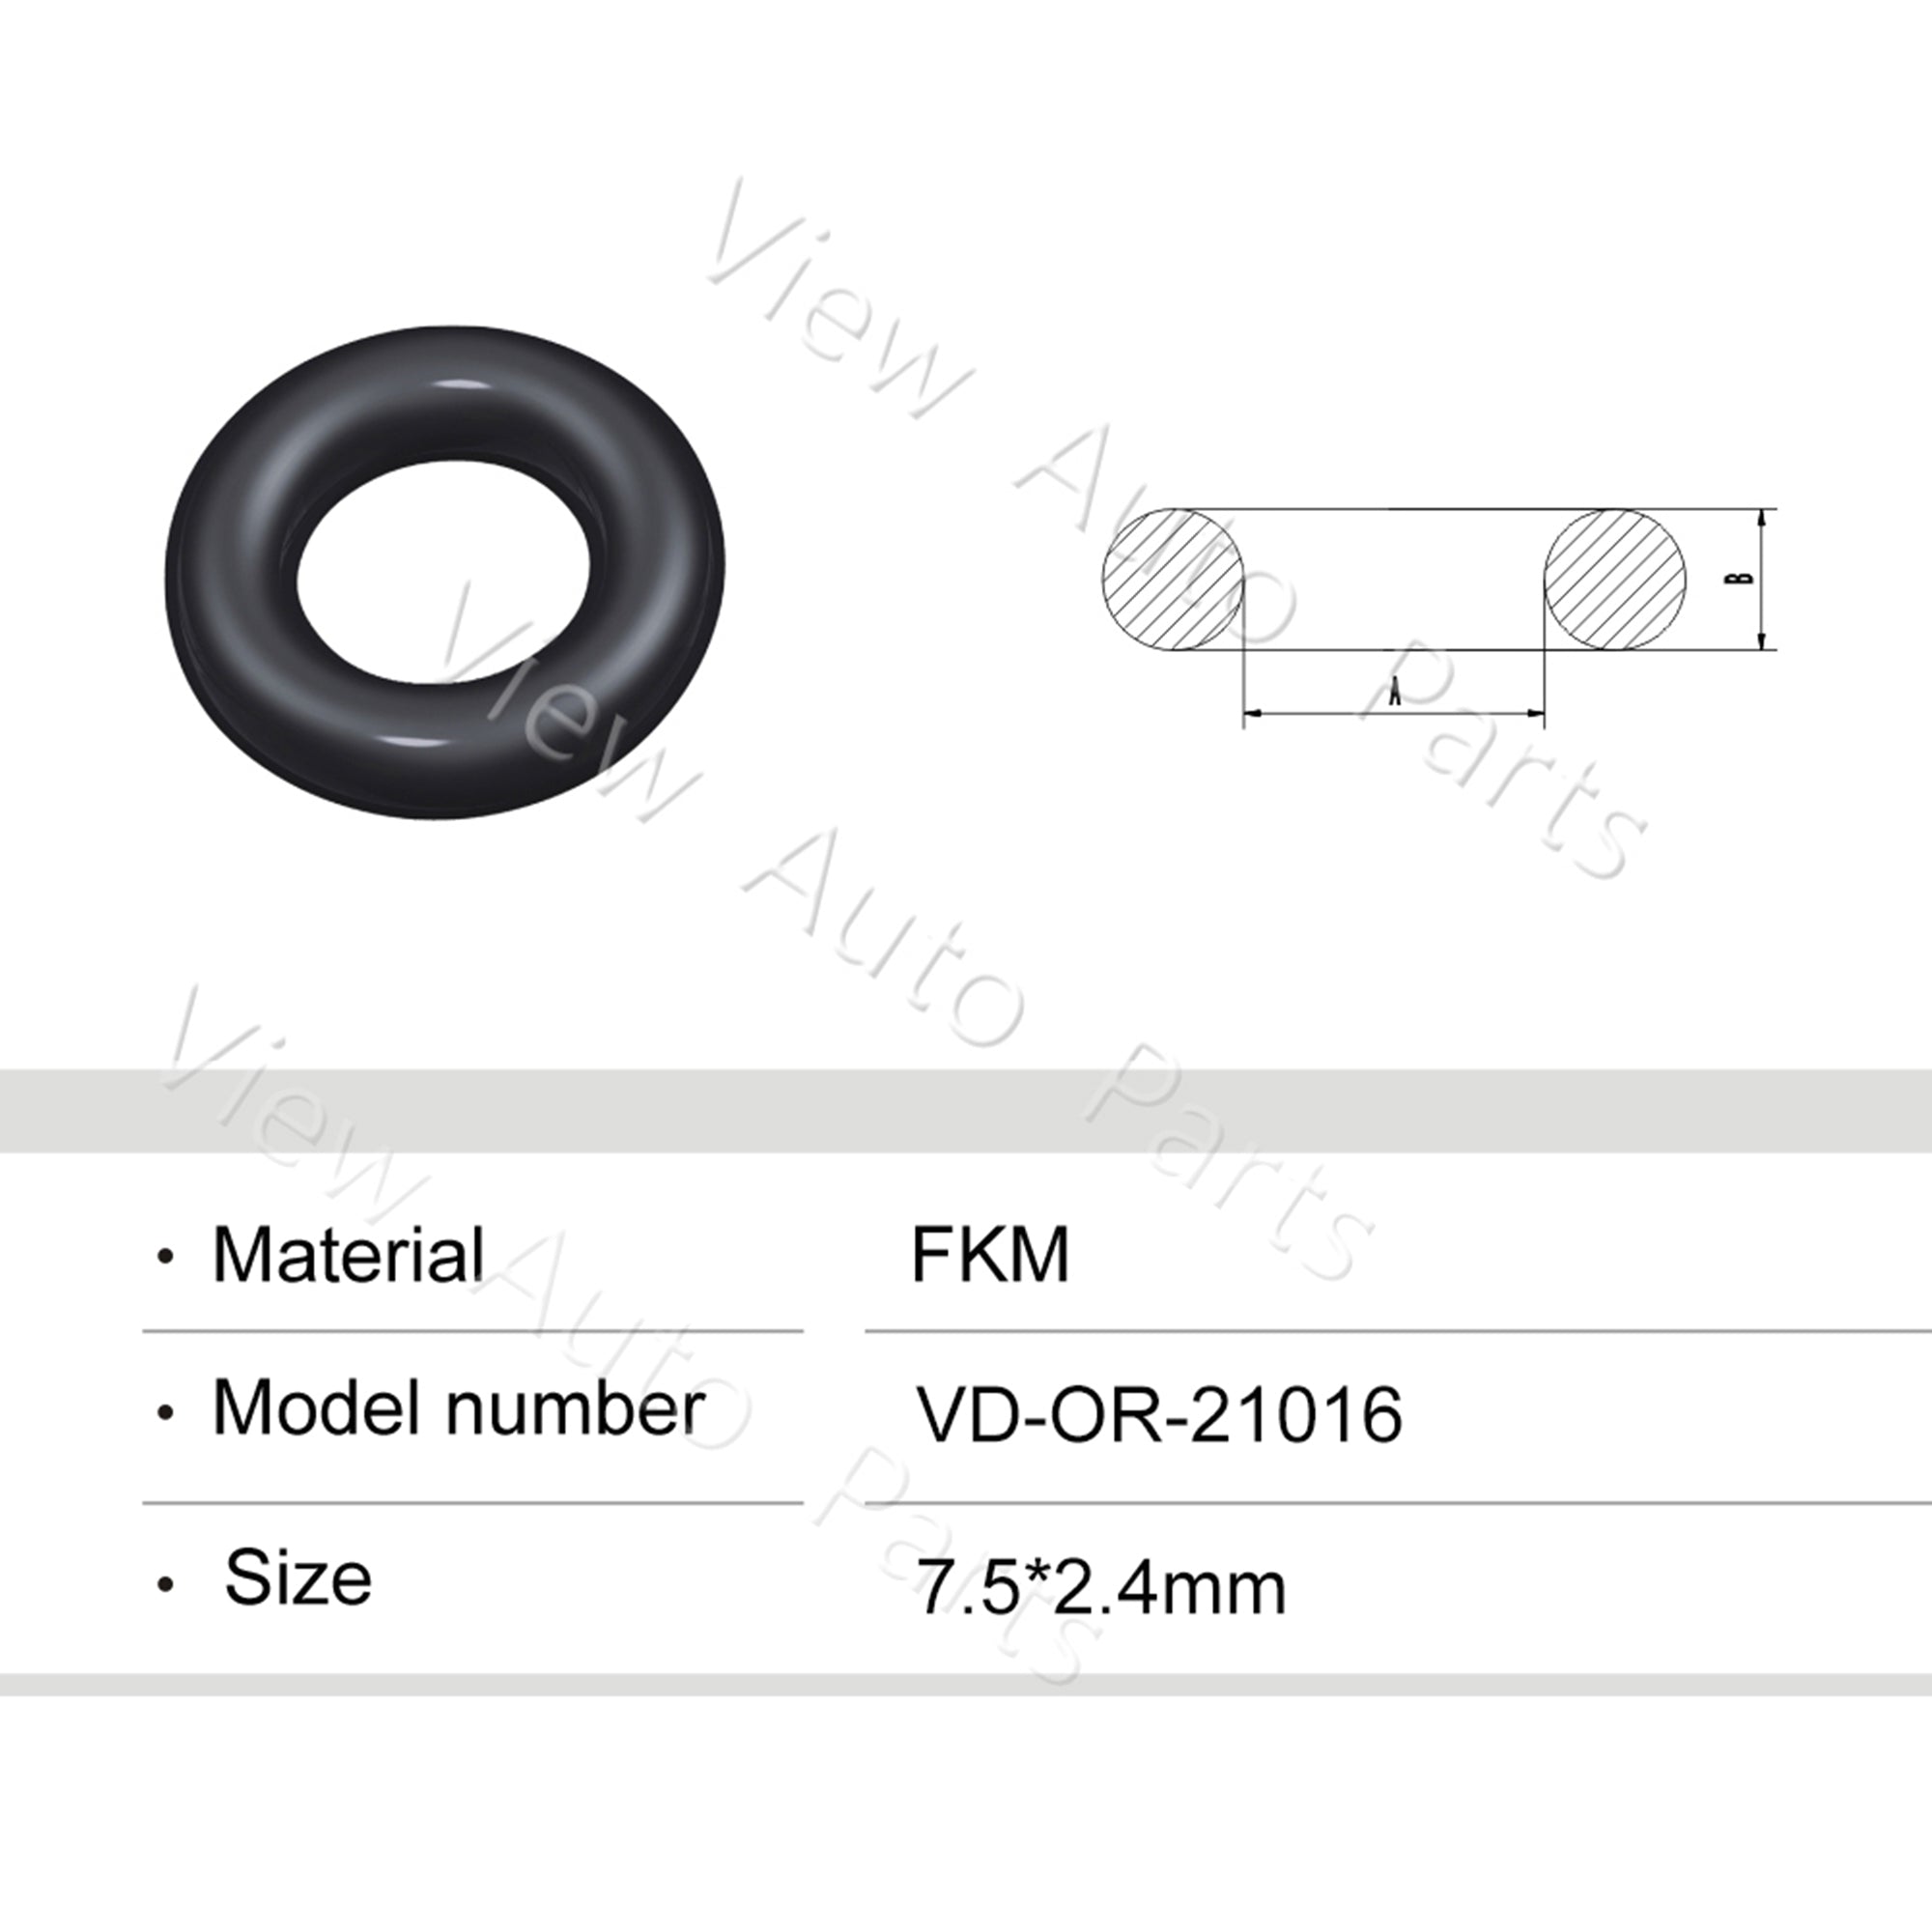 Fuel Injector Rubber Seal Orings for Fuel Injector Repair Kits FKM & Rubber Heat Resistant, Size: 7.5*2.4mm OR-21016